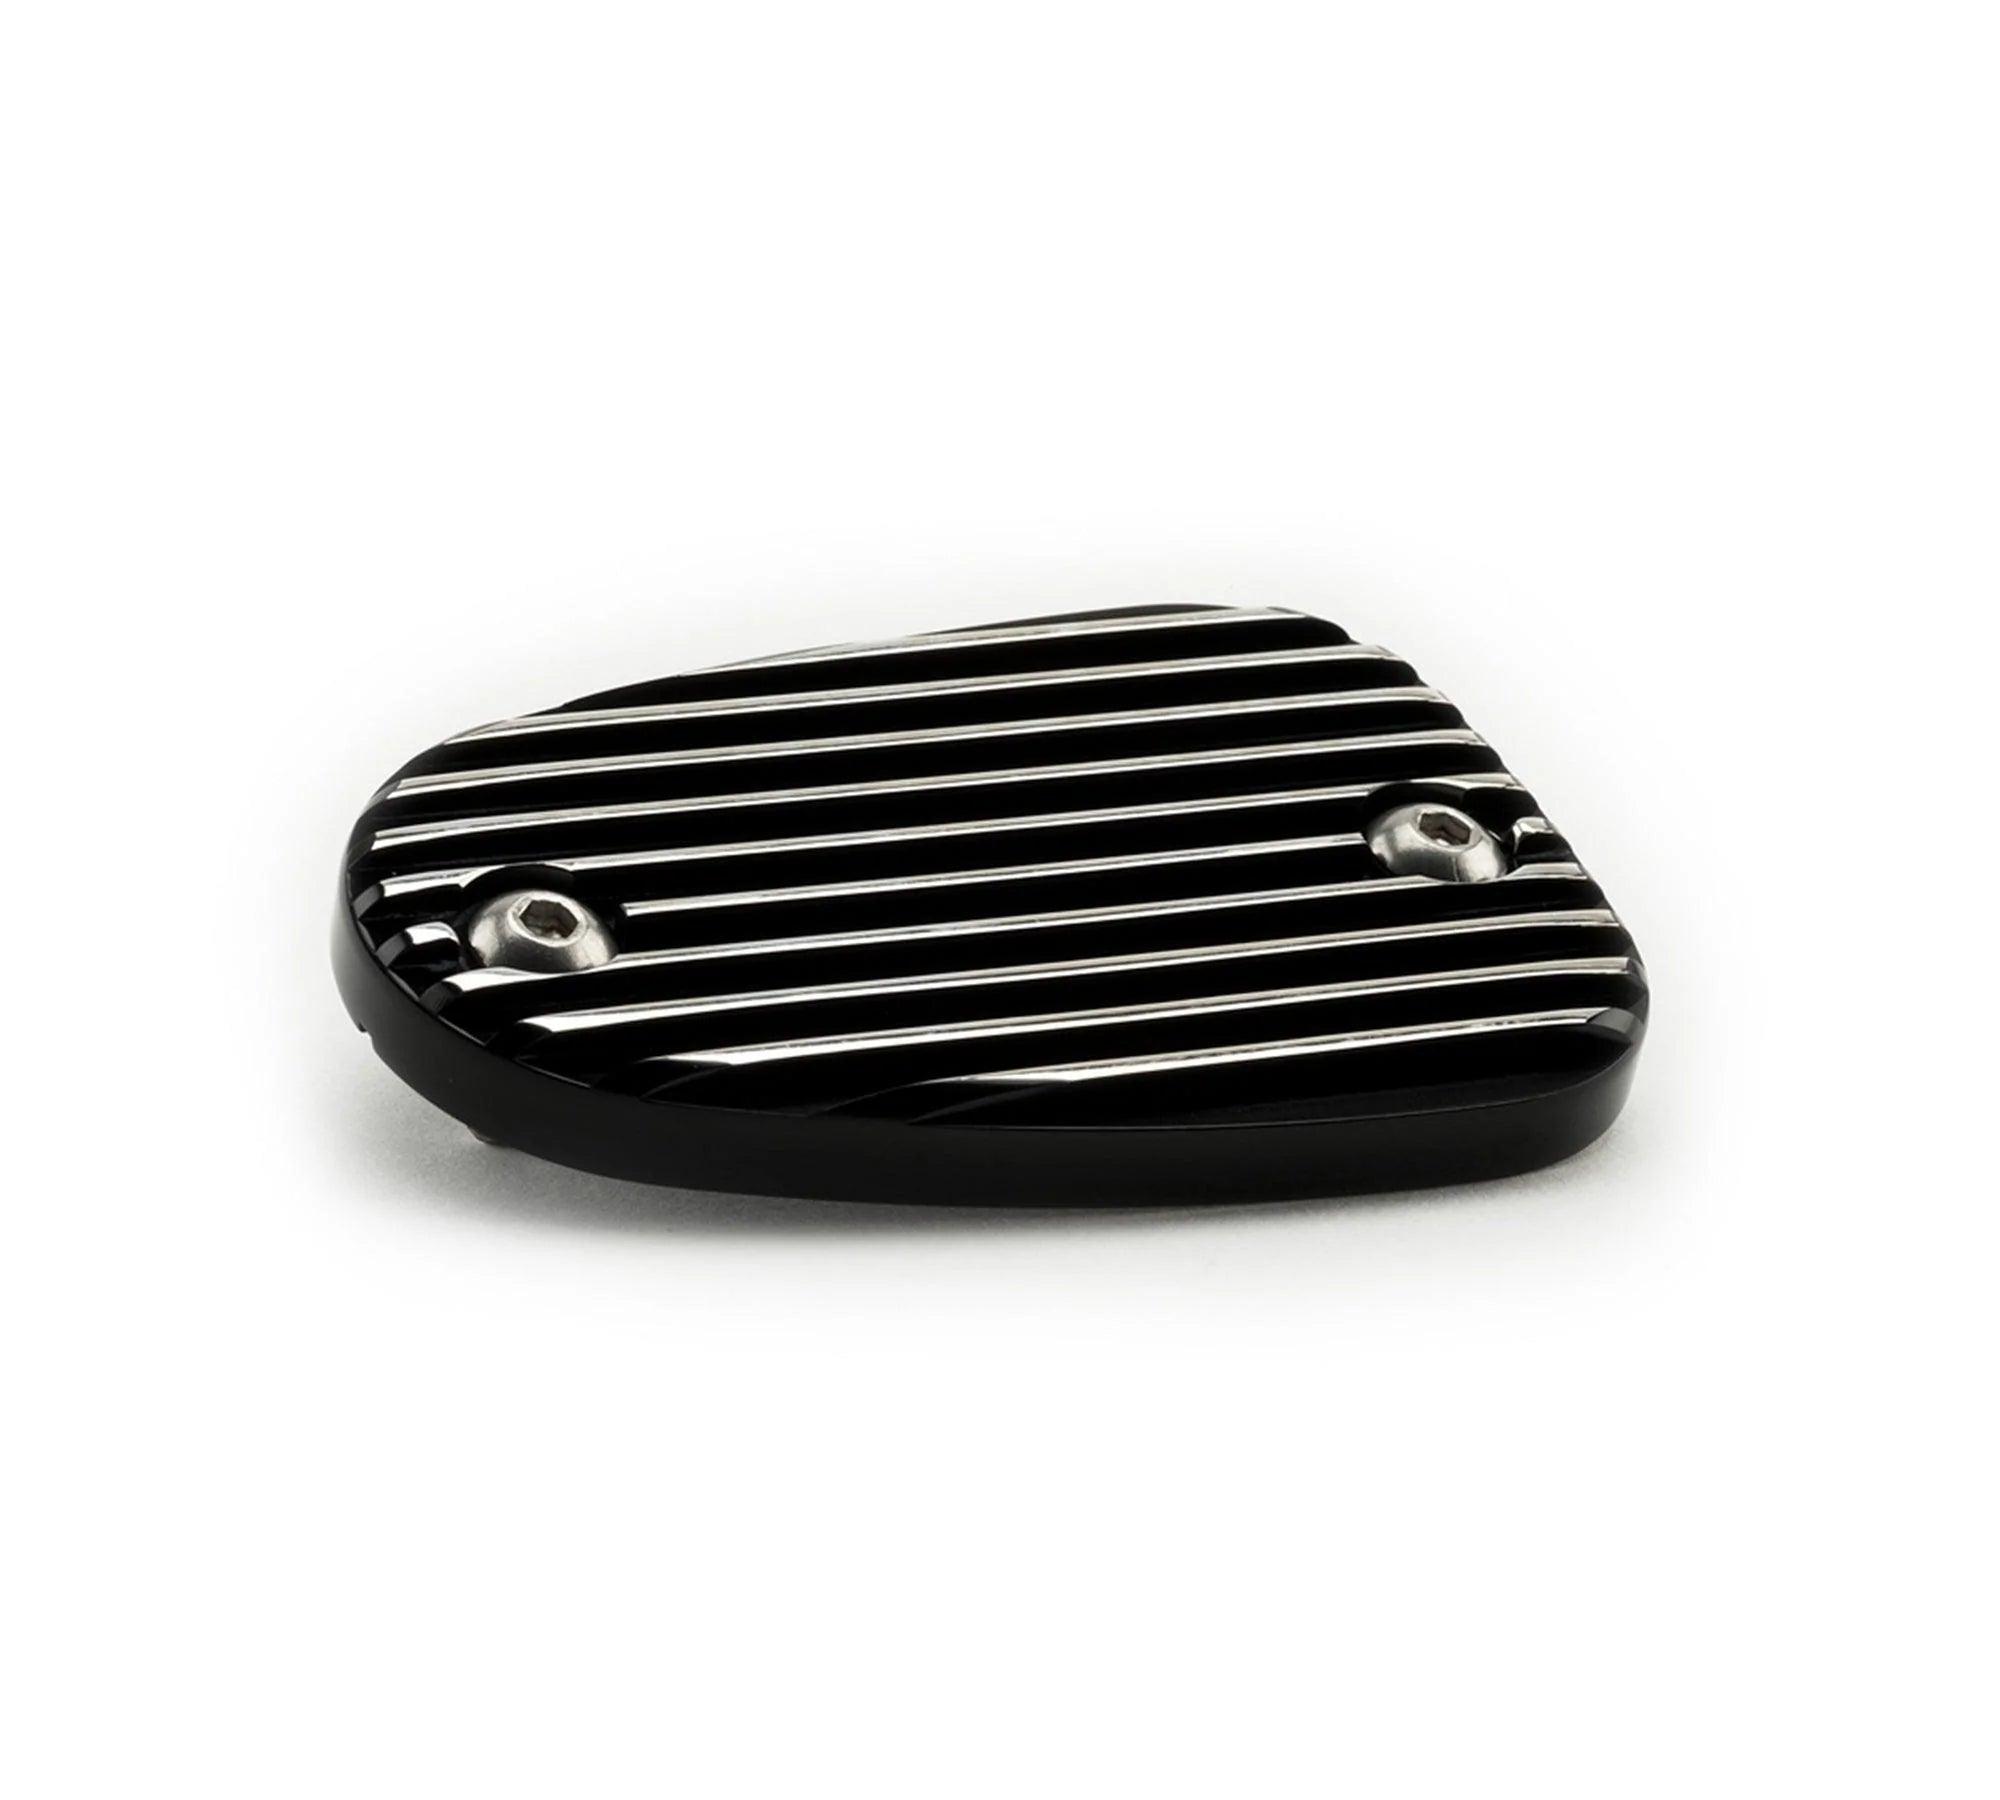 Top Notch Finned Master Cylinder Cover for Triumph Motorcycles